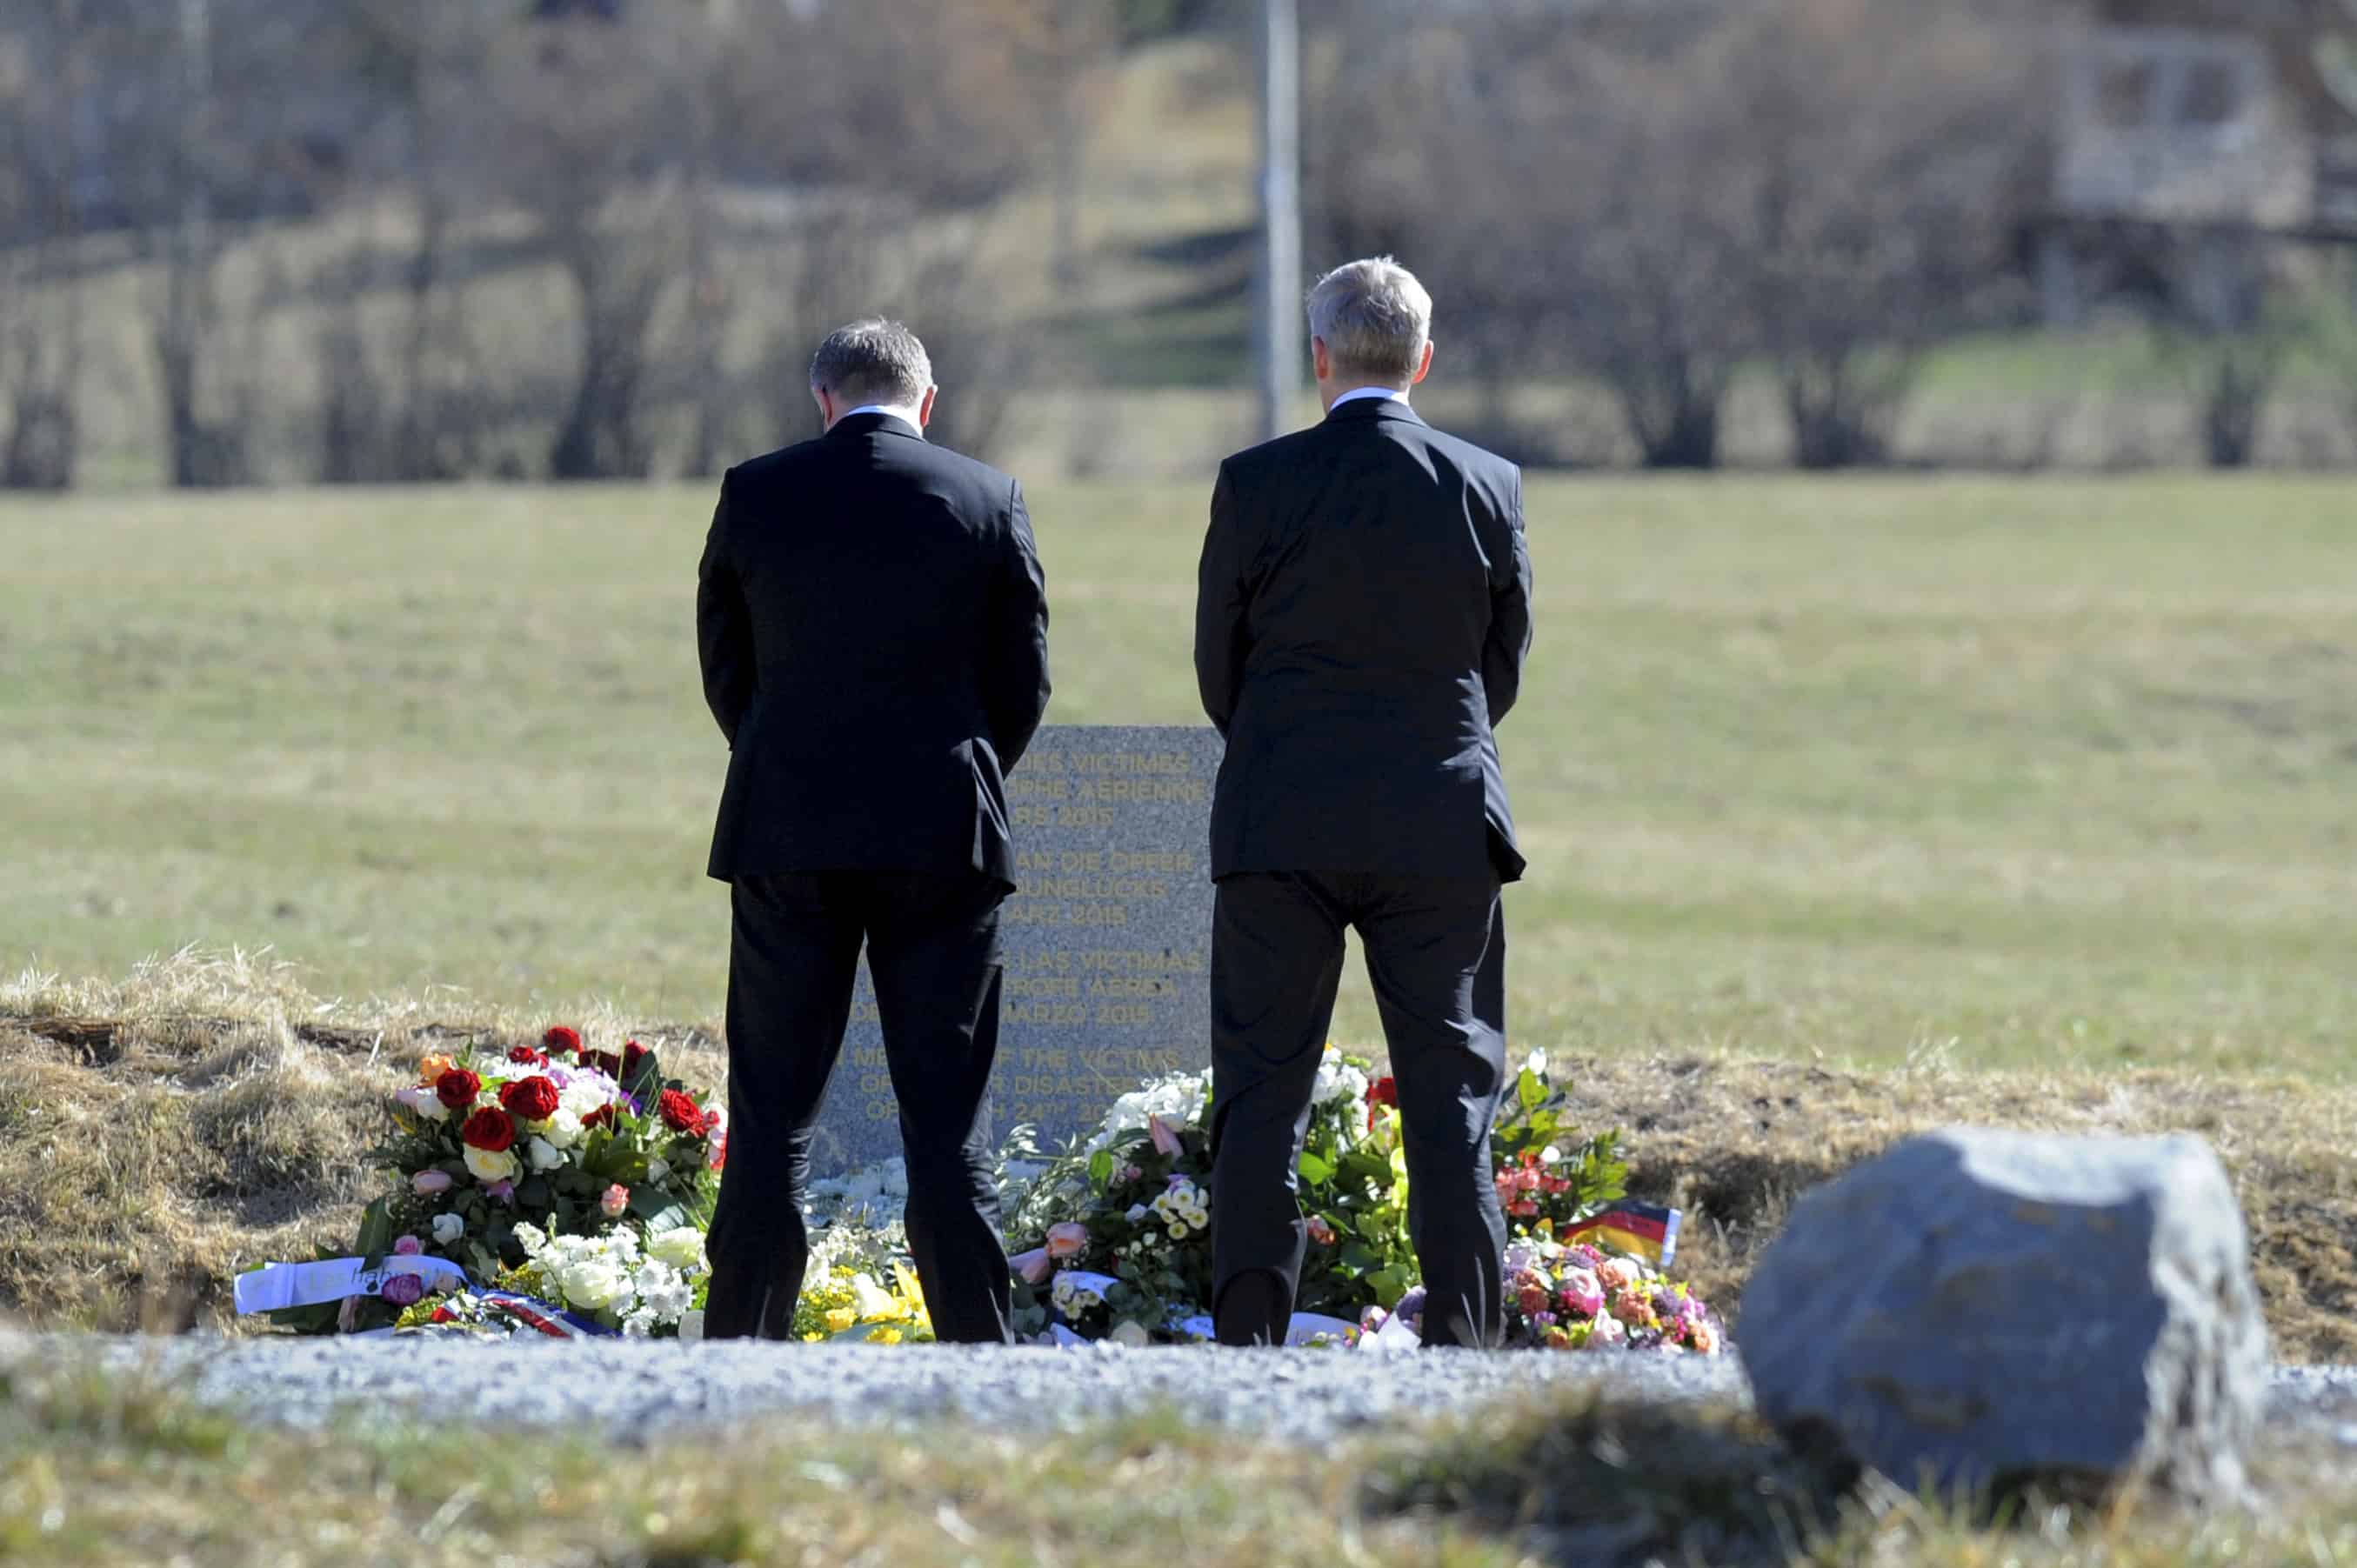 Lufthansa CEO Carsten Spohr, left, and Germanwings CEO Thomas Winkelmann lay a wreath near a stele in memory of the victims of the Germanwings Airbus A320 crash.